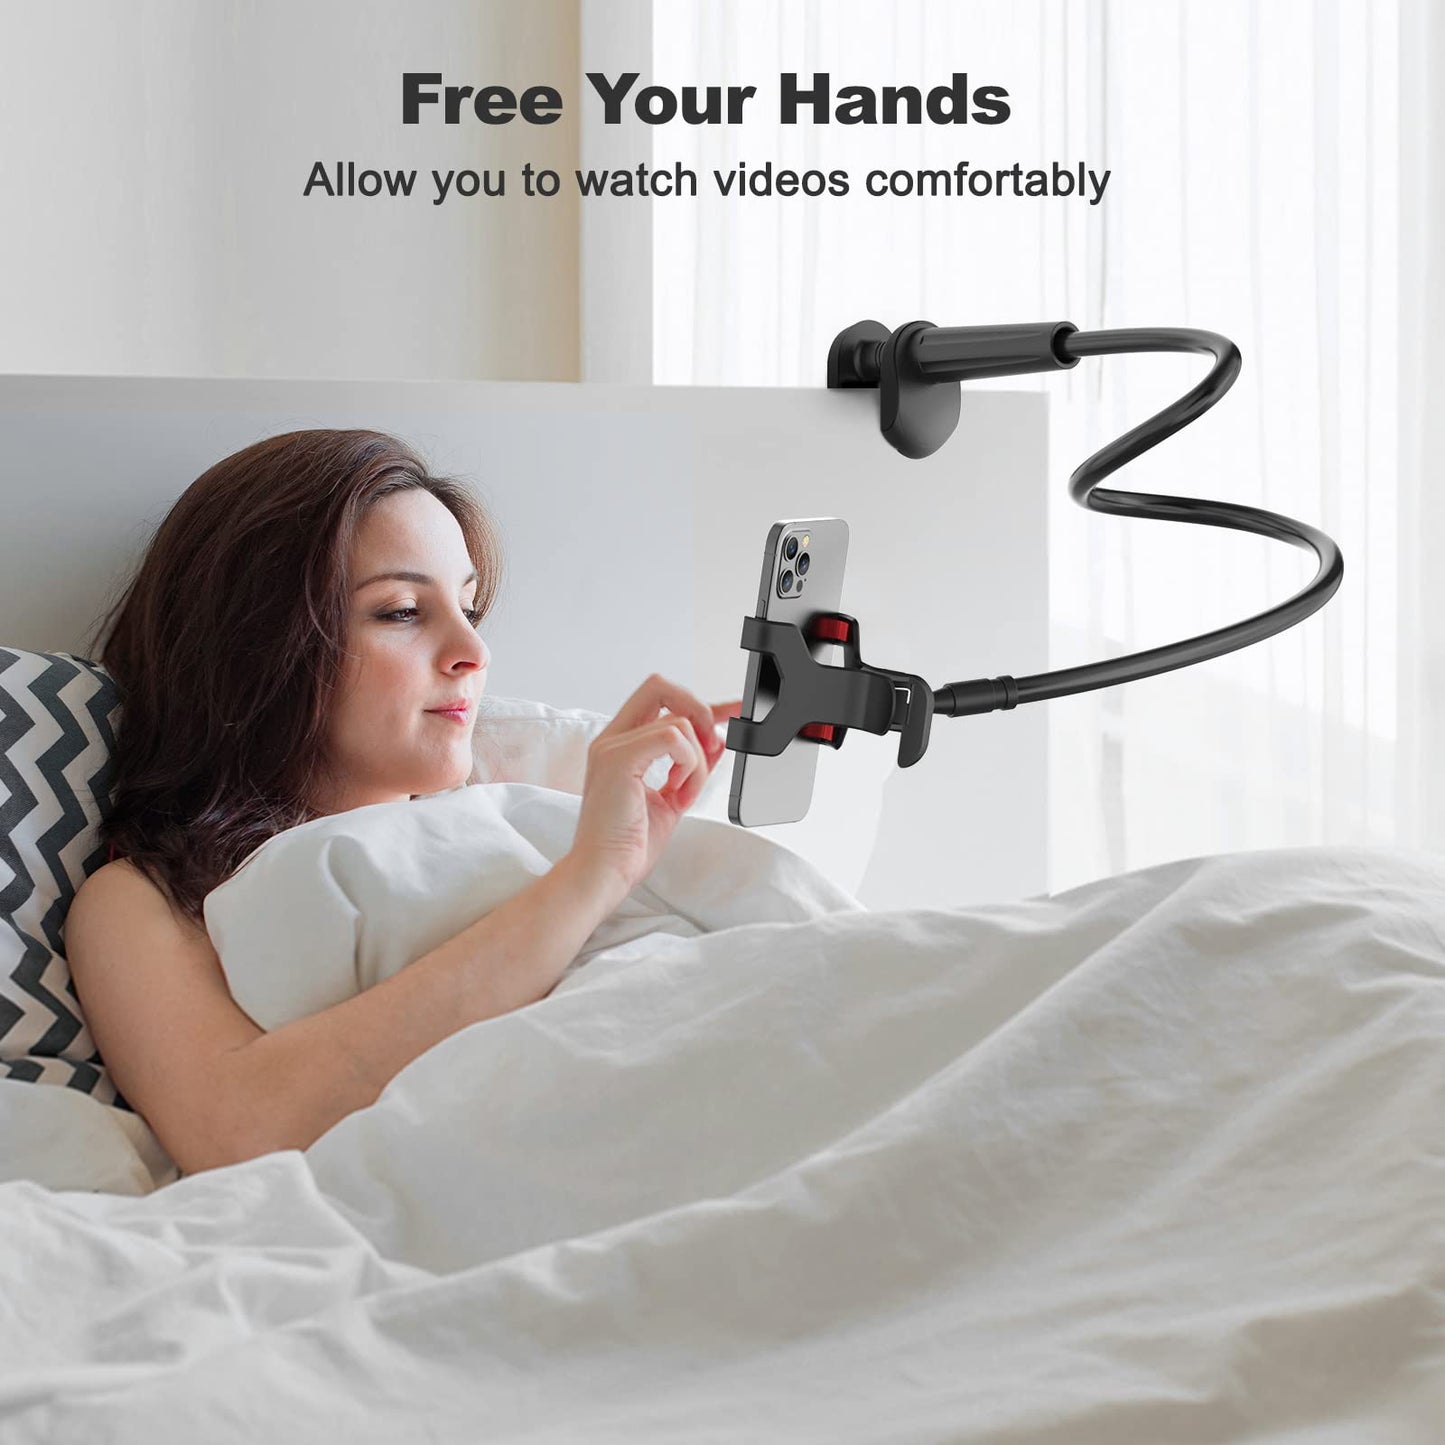 VIVI MAO Gooseneck Cell Phone Holder, Universal 360 Flexible Phone Stand Lazy Bracket Mount Long Arms Clamp for Phone 13 Pro Xs Max XR X 8 7 6 6s Plus and Other 3.5~6.7'' Device (Black)…